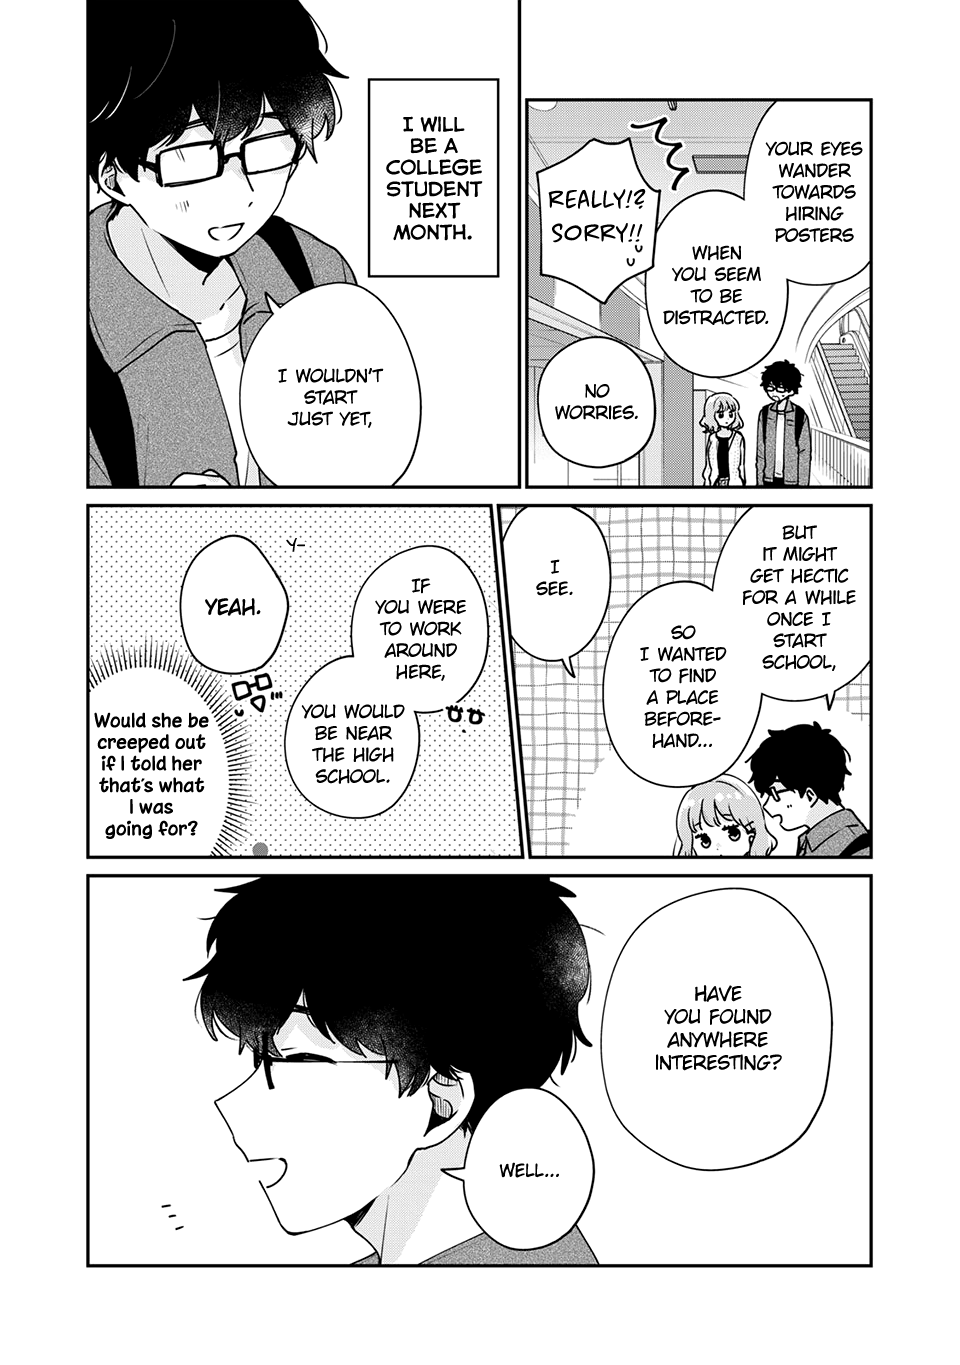 It's Not Meguro-san's First Time chapter 48 page 3